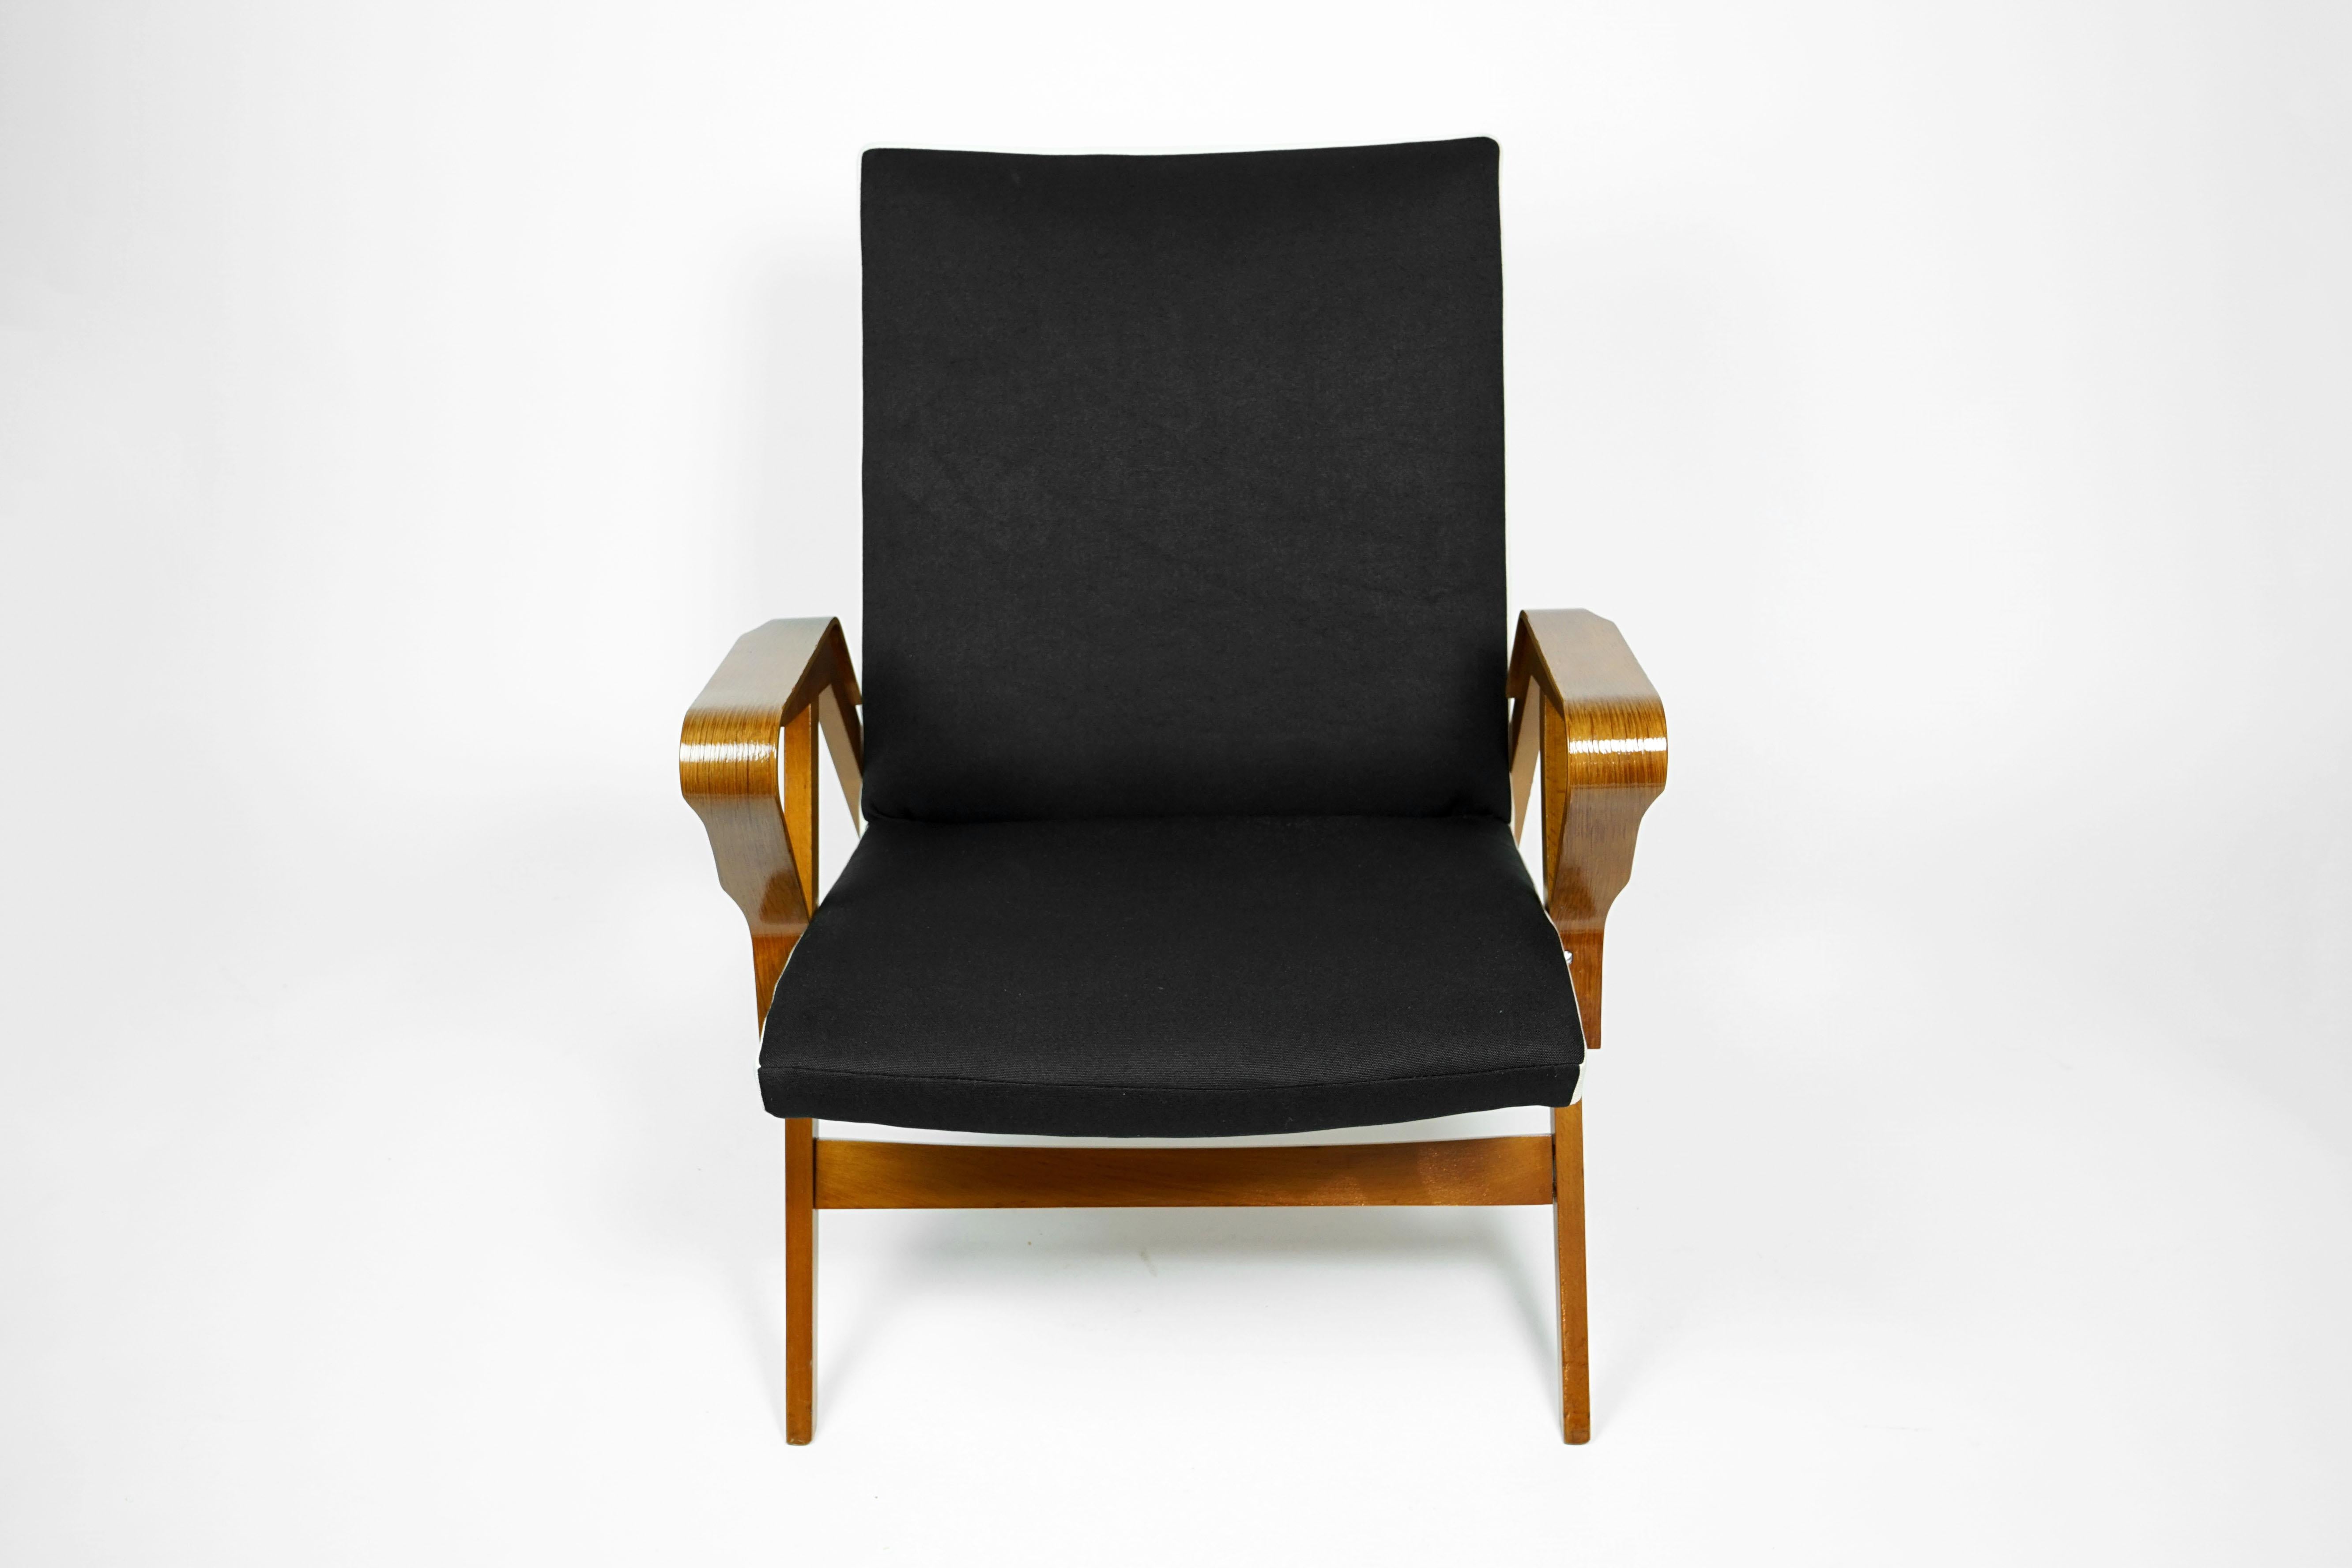 Extraordinary armchair, by manufacturer Tatra, former Czechoslovakia.

The chair is completely restored and in an excellent condition.
The armrests are bended oak and beechwood have been re-polished in a shiny walnut tone. Reupholstery is in a